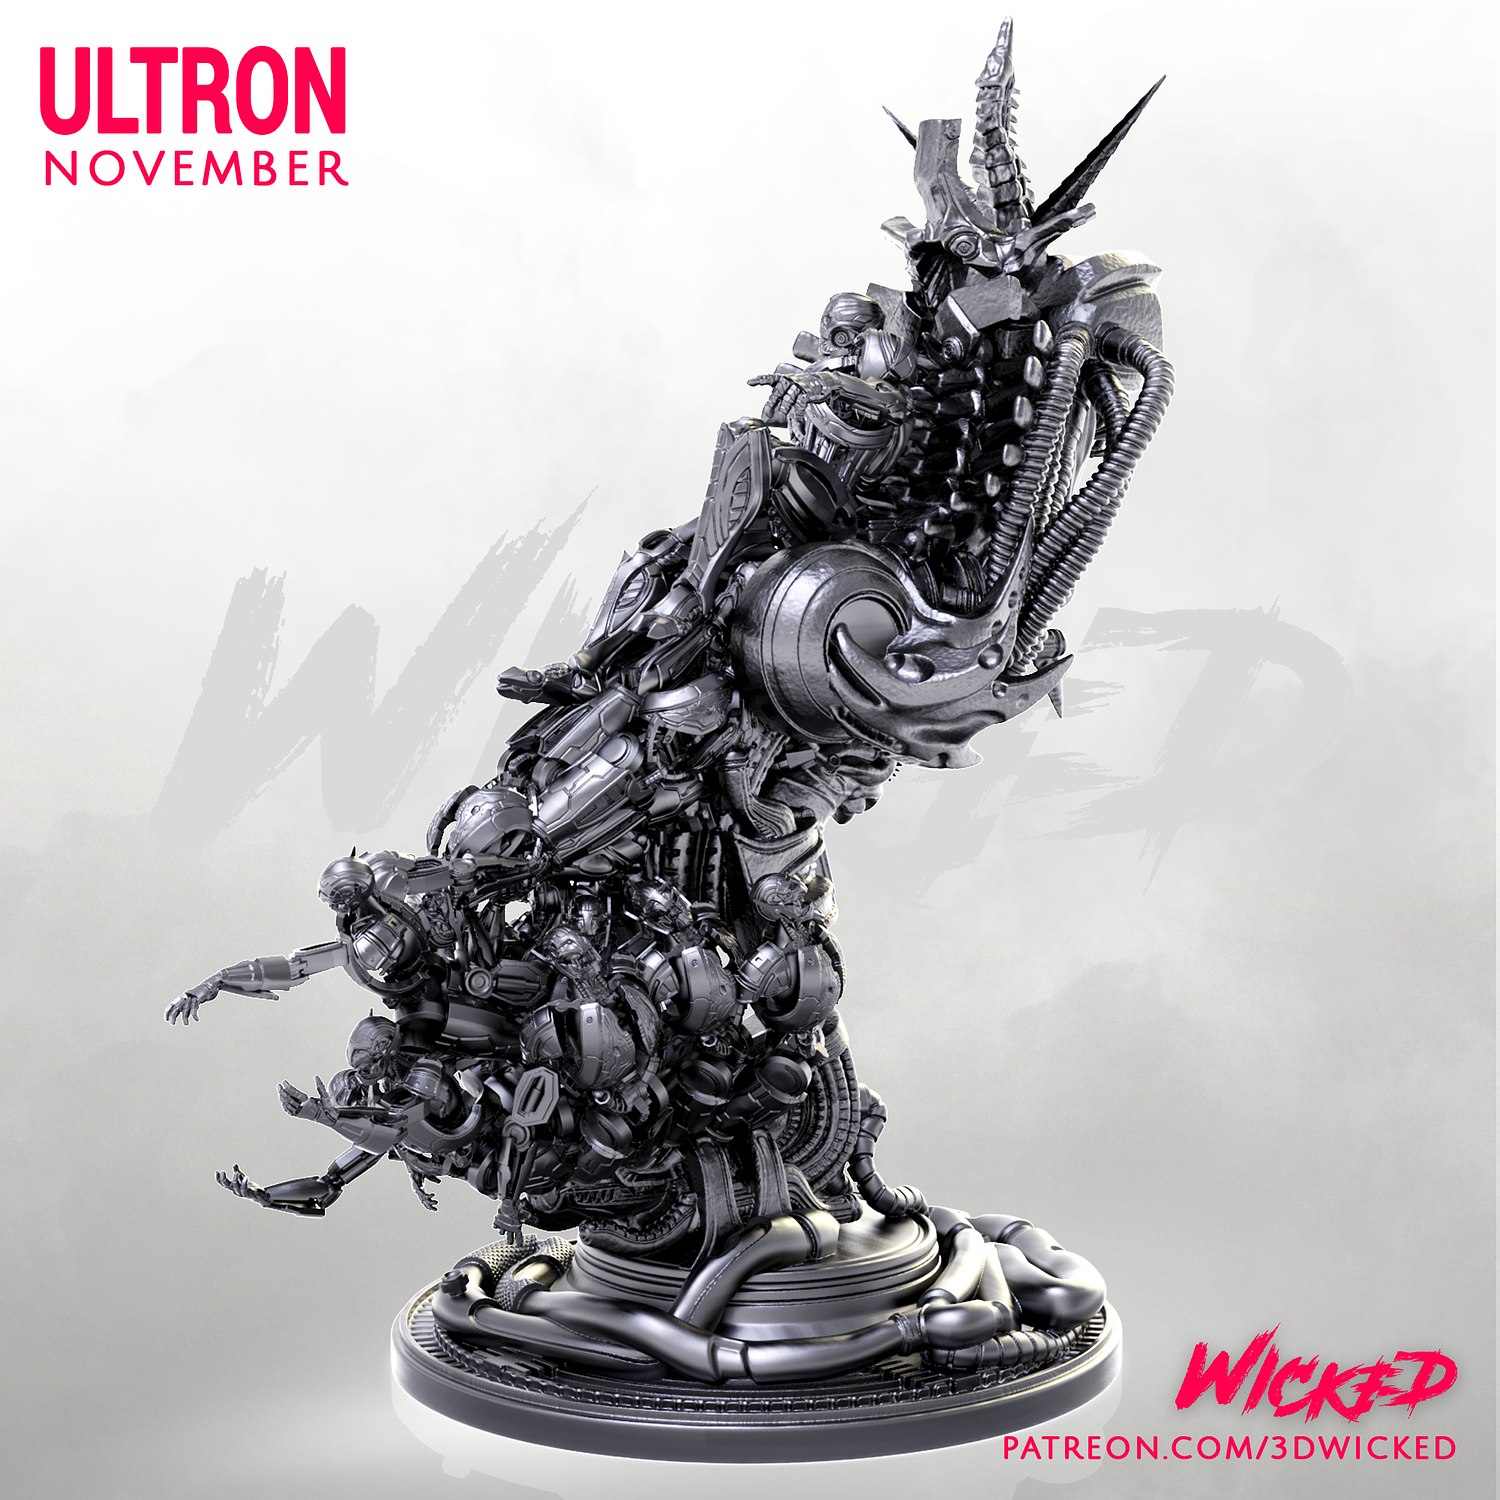 Ultron from Marvel